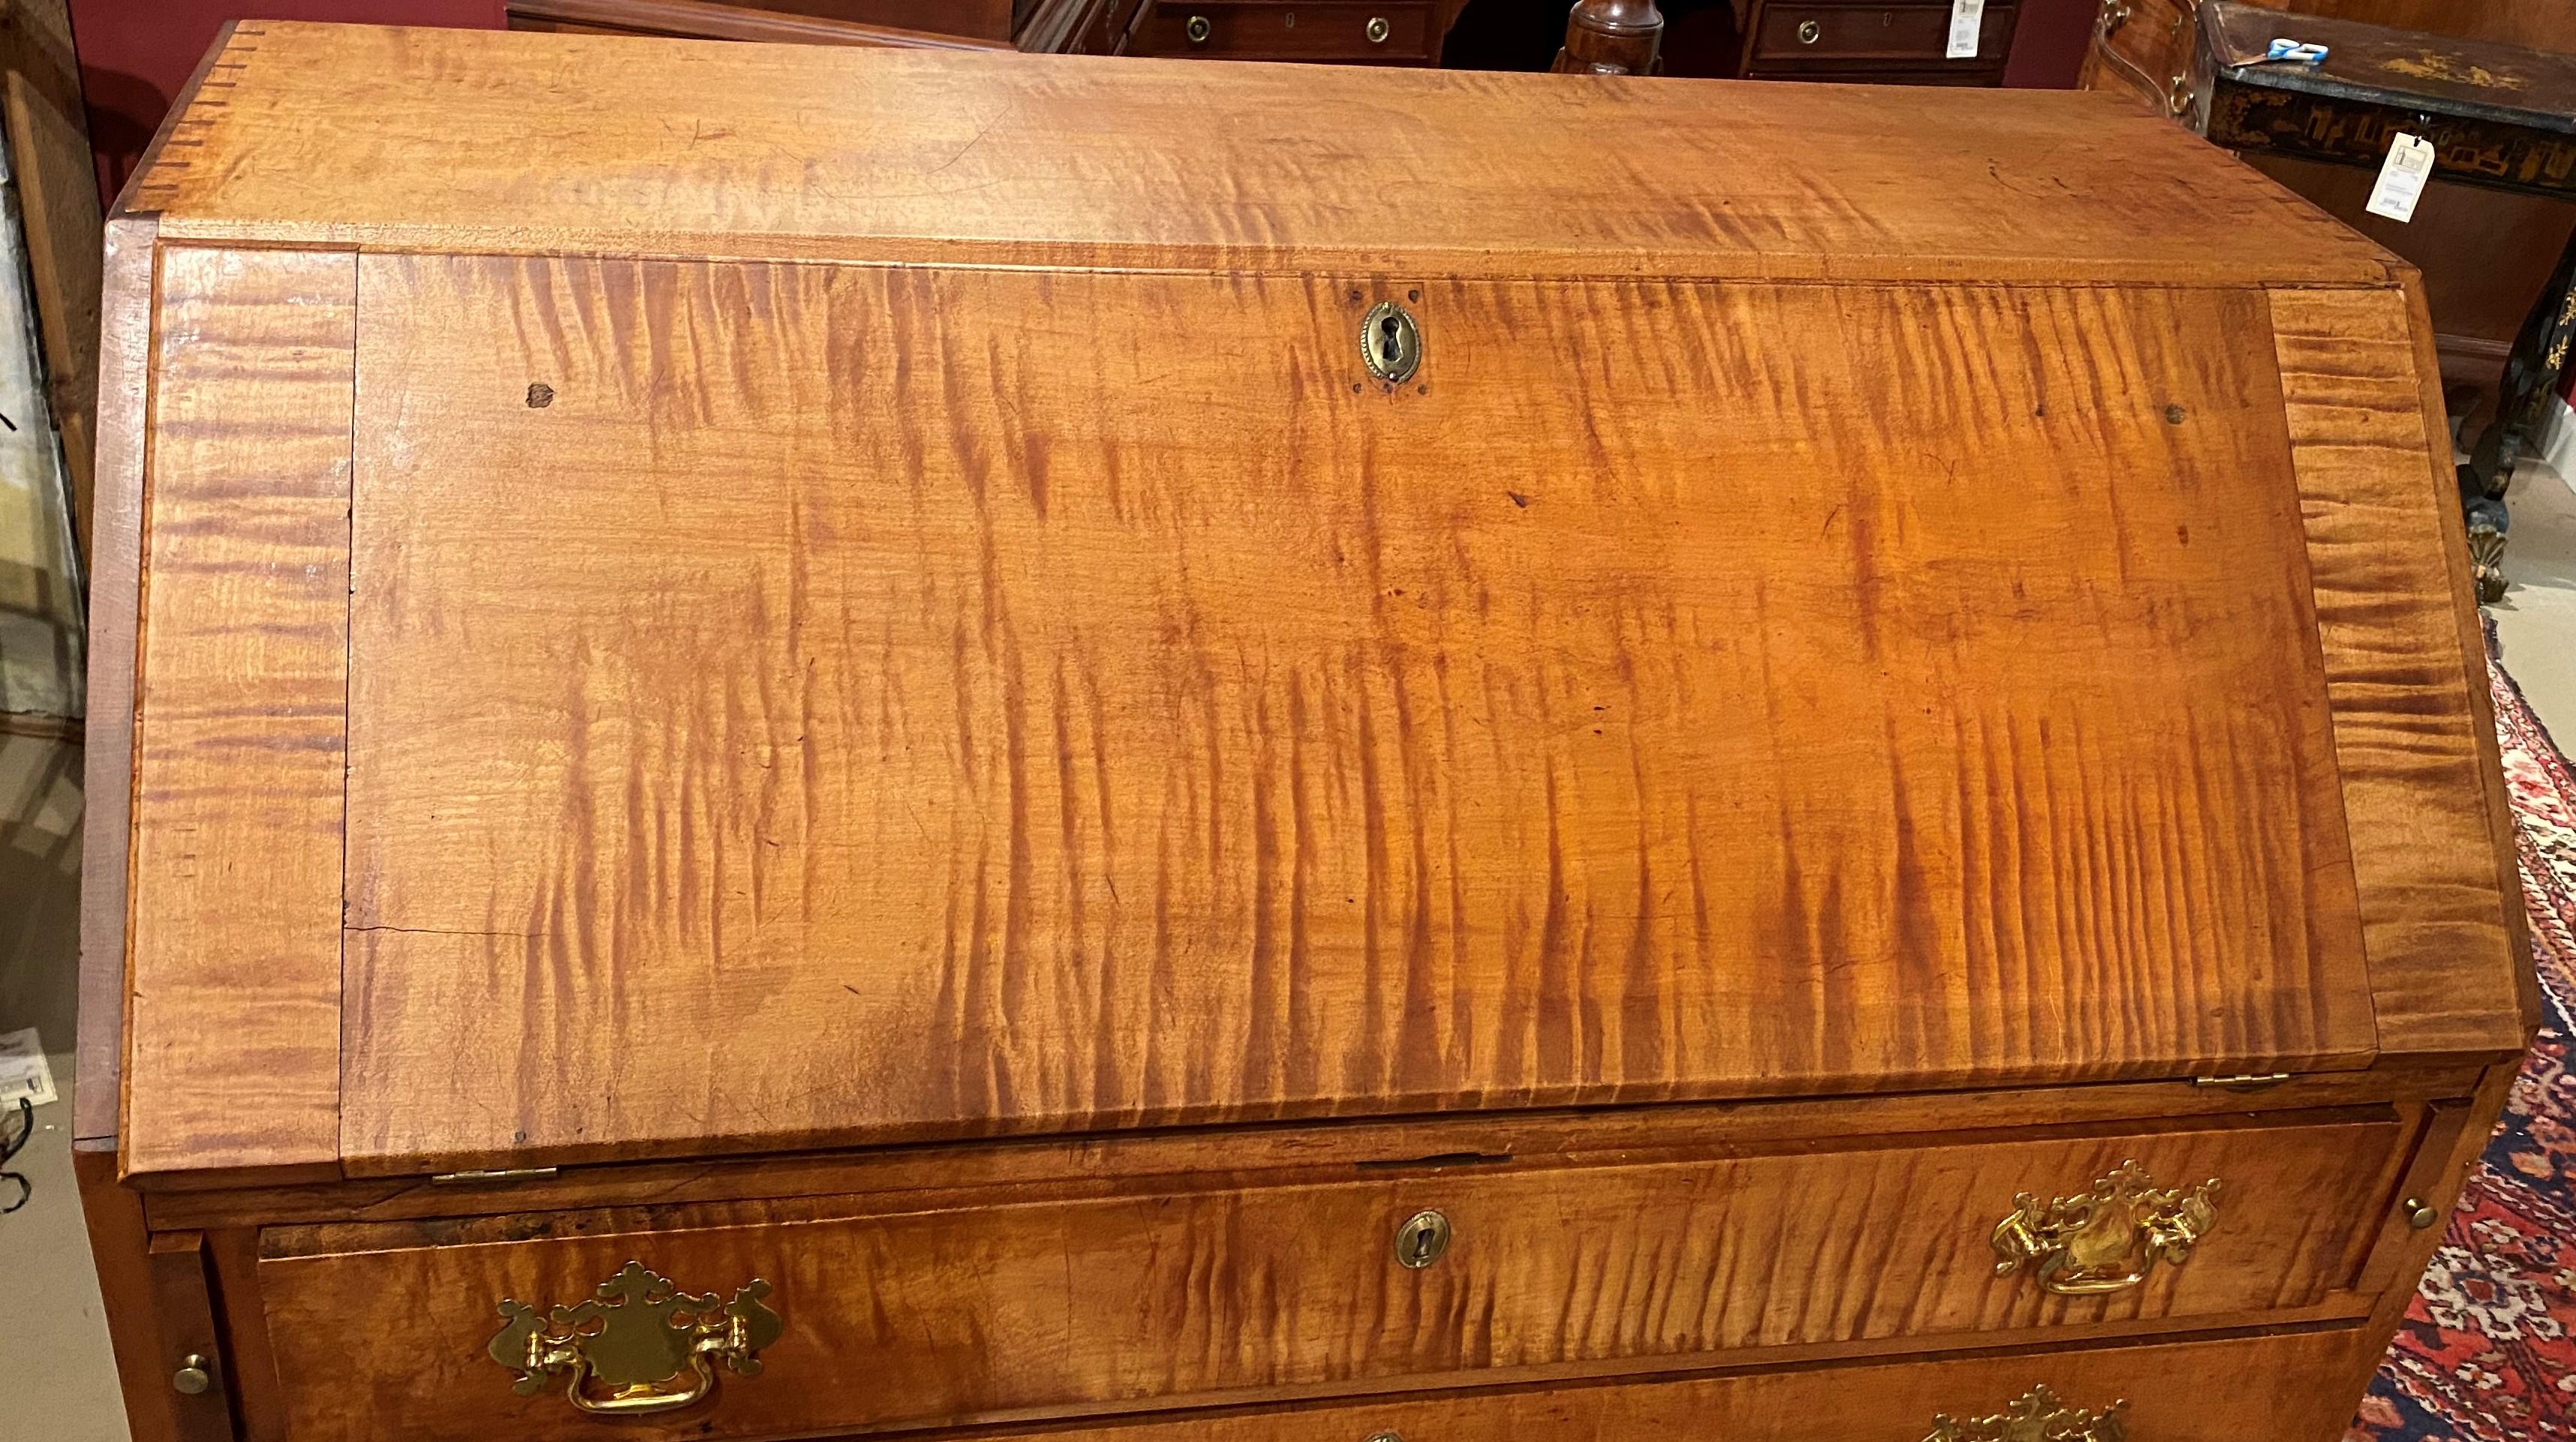 A fine example of an American Hepplewhite slant front desk with strong figured tiger maple, circa 1790, with compartmentalized interior featuring seven document drawers over three open cubbies. The lower half of the desk features four graduated long